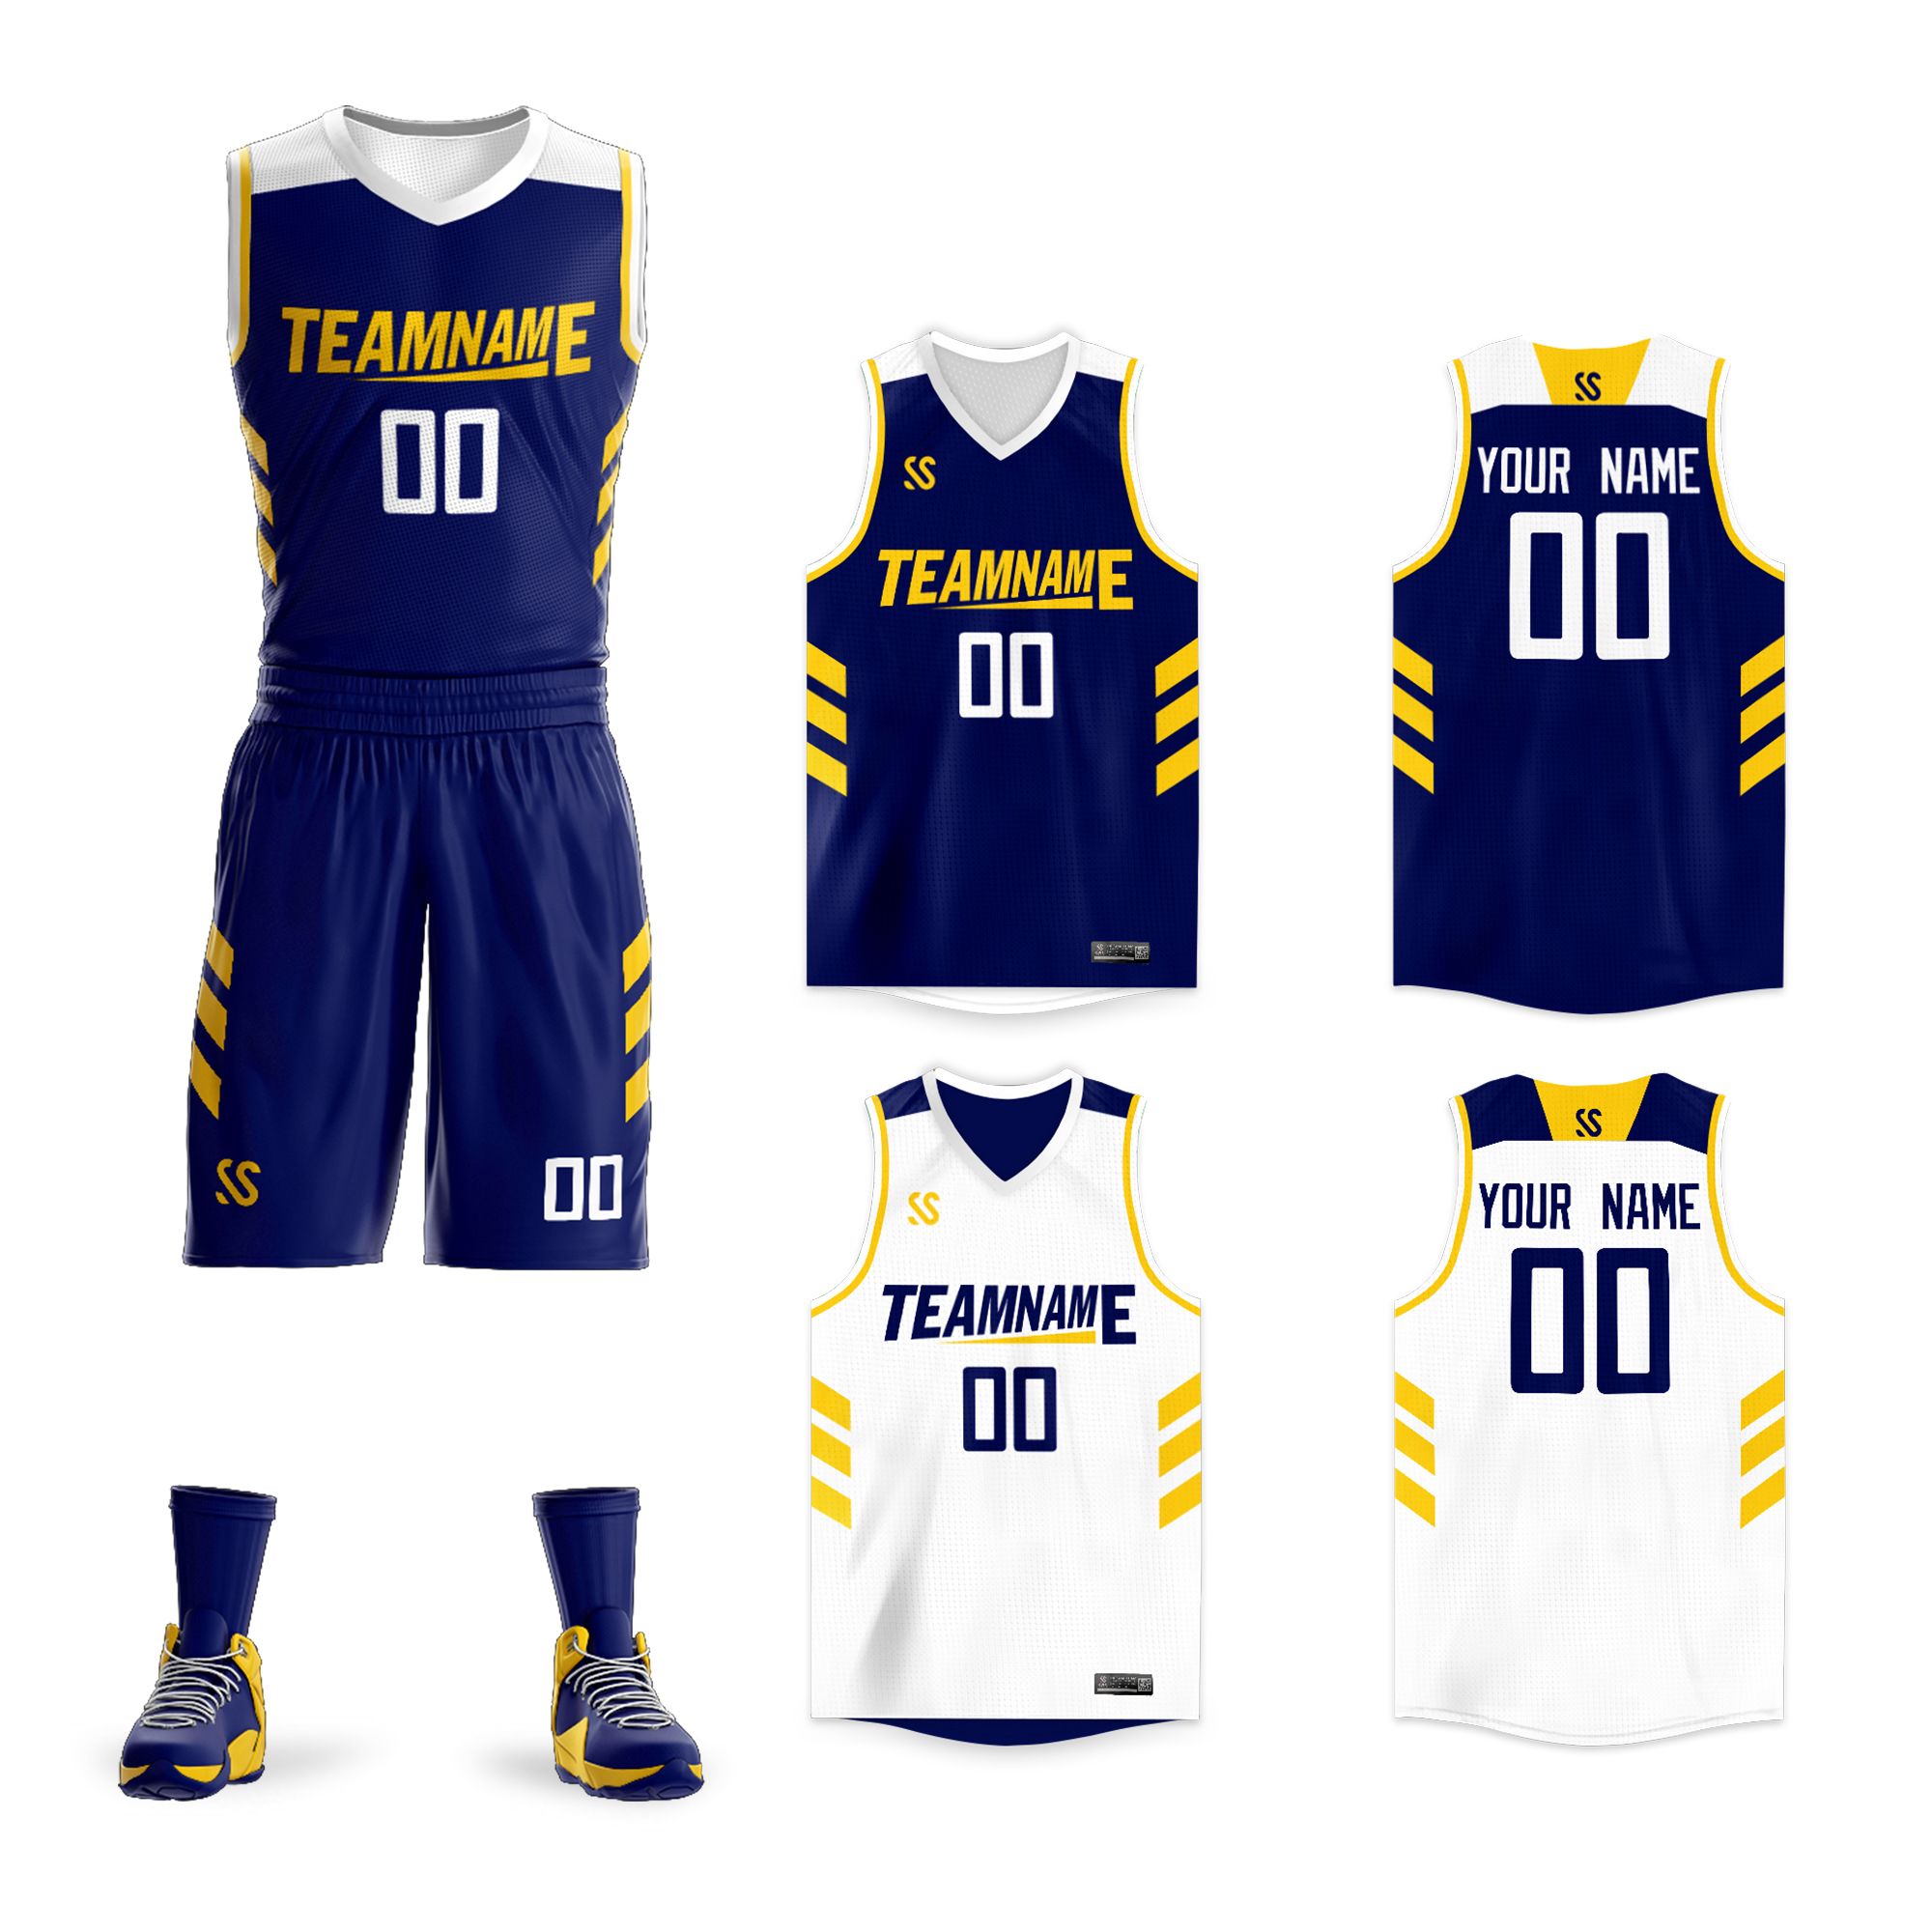 navy and white reversible basketball jersey